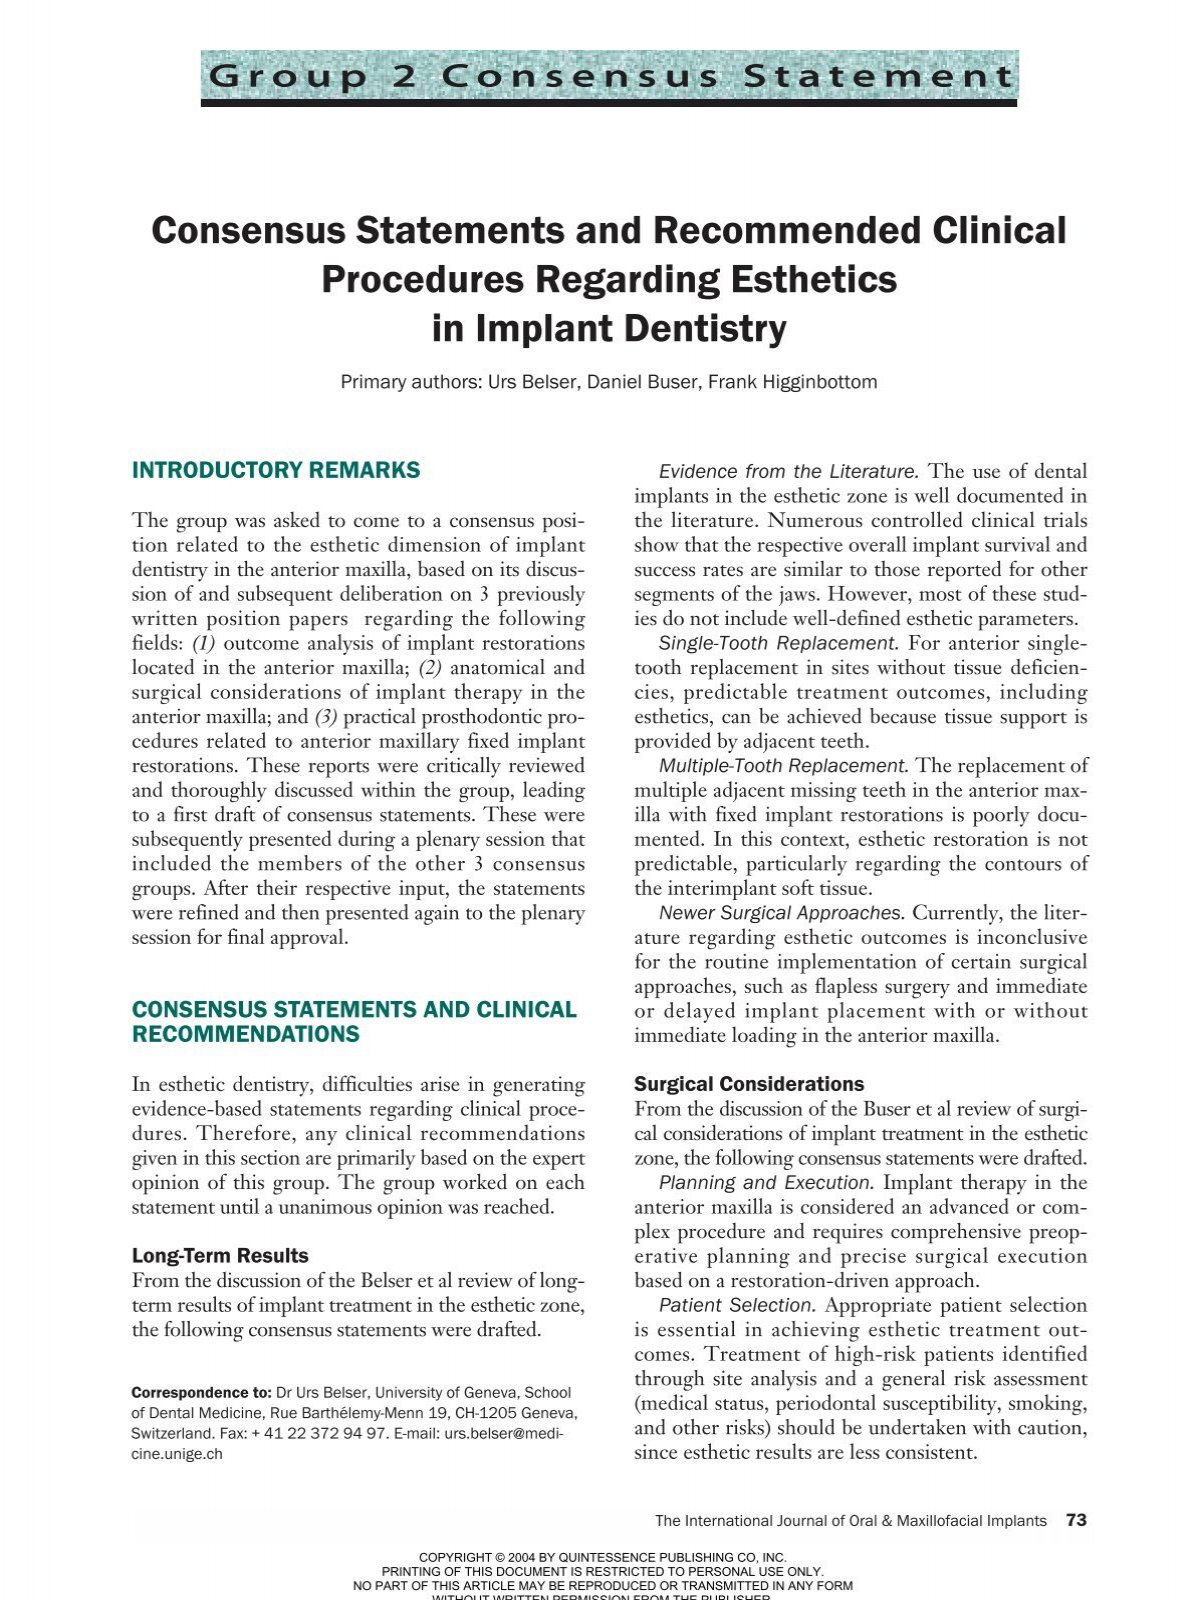 Consensus Statements And Recommended Clinical Procedures